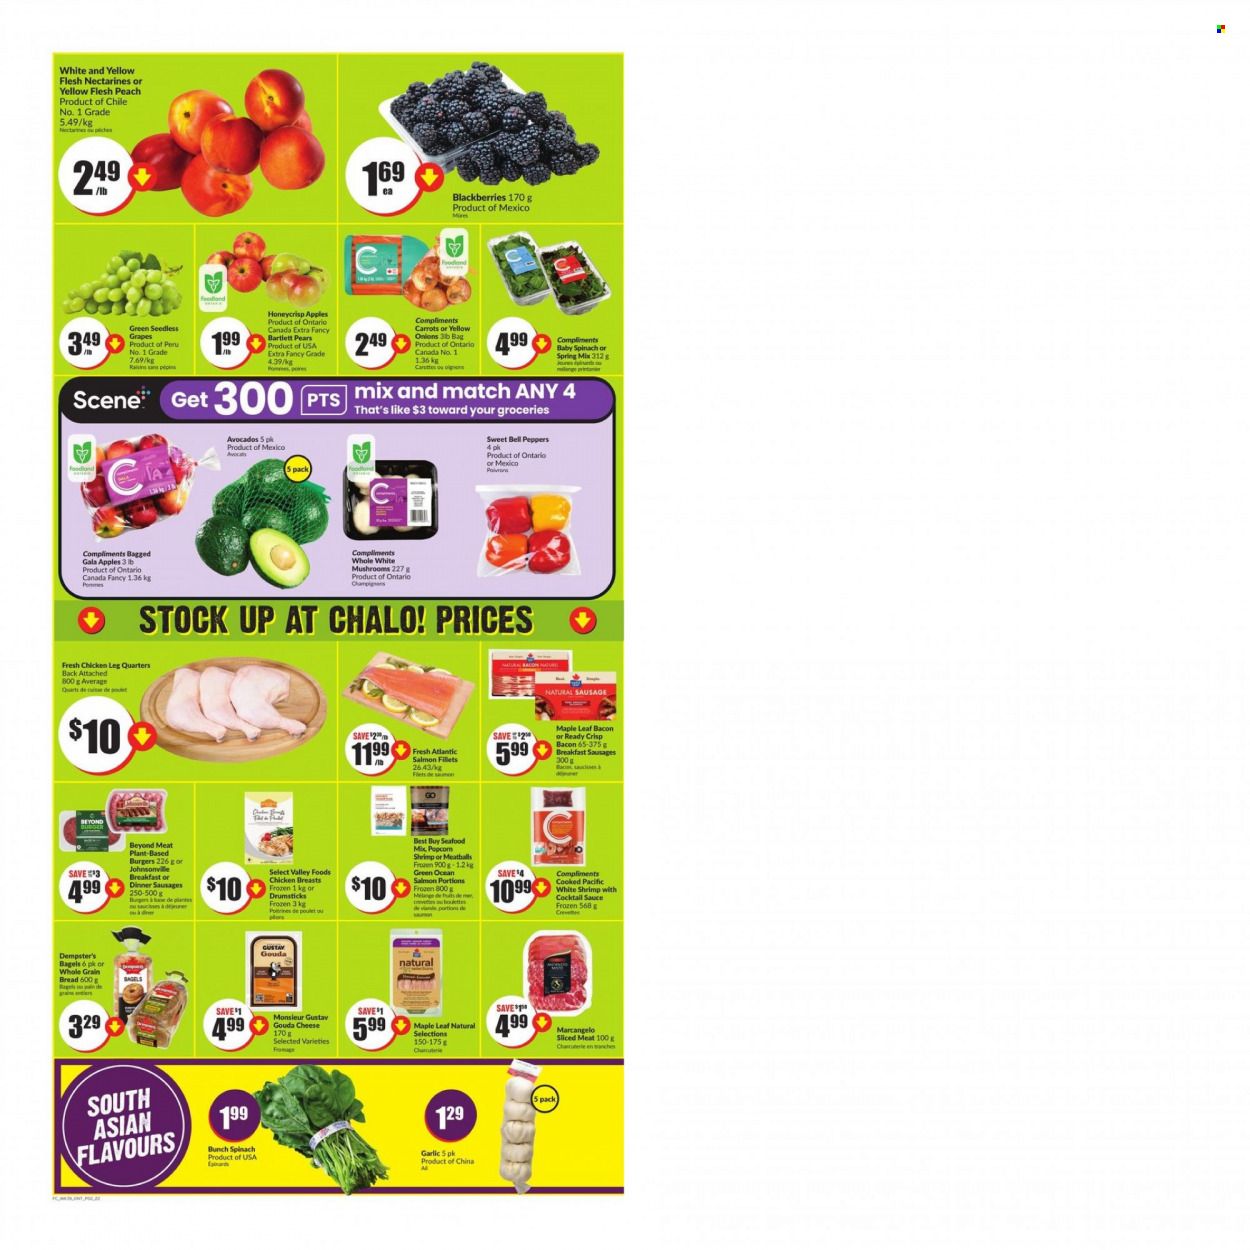 thumbnail - Chalo! FreshCo. Flyer - January 26, 2023 - February 01, 2023 - Sales products - mushrooms, bell peppers, garlic, peppers, apples, avocado, Bartlett pears, blackberries, Gala, nectarines, pears, salmon, salmon fillet, seafood, shrimps, meatballs, hamburger, sauce, bacon, Johnsonville, sausage, gouda, cheese, cocktail sauce, chicken legs. Page 2.